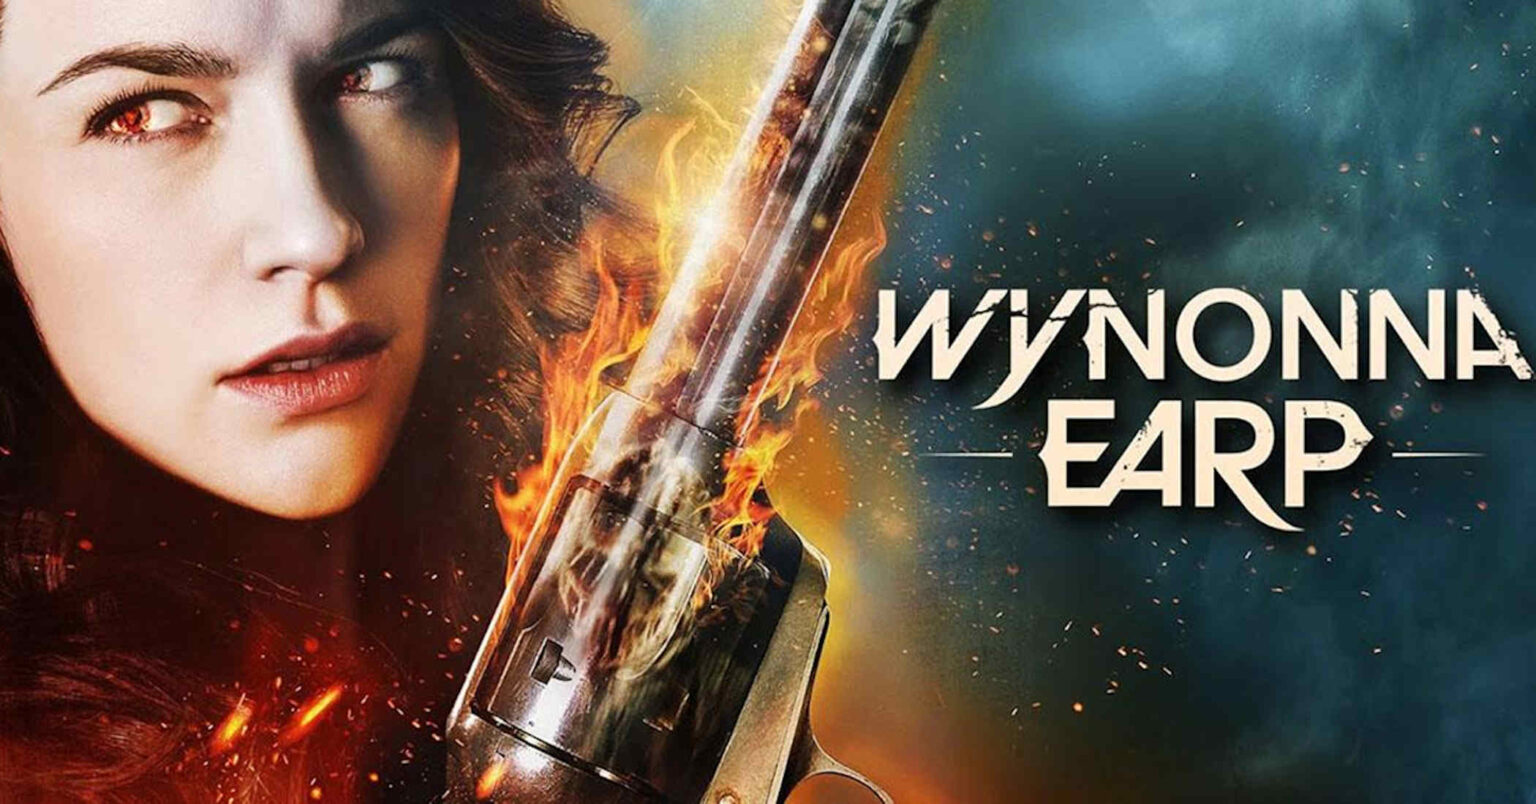 'Wynonna Earp' is finally back with a rip-roaring new story filled with action and humor. Melanie Scrofano spills the tea on season 4.